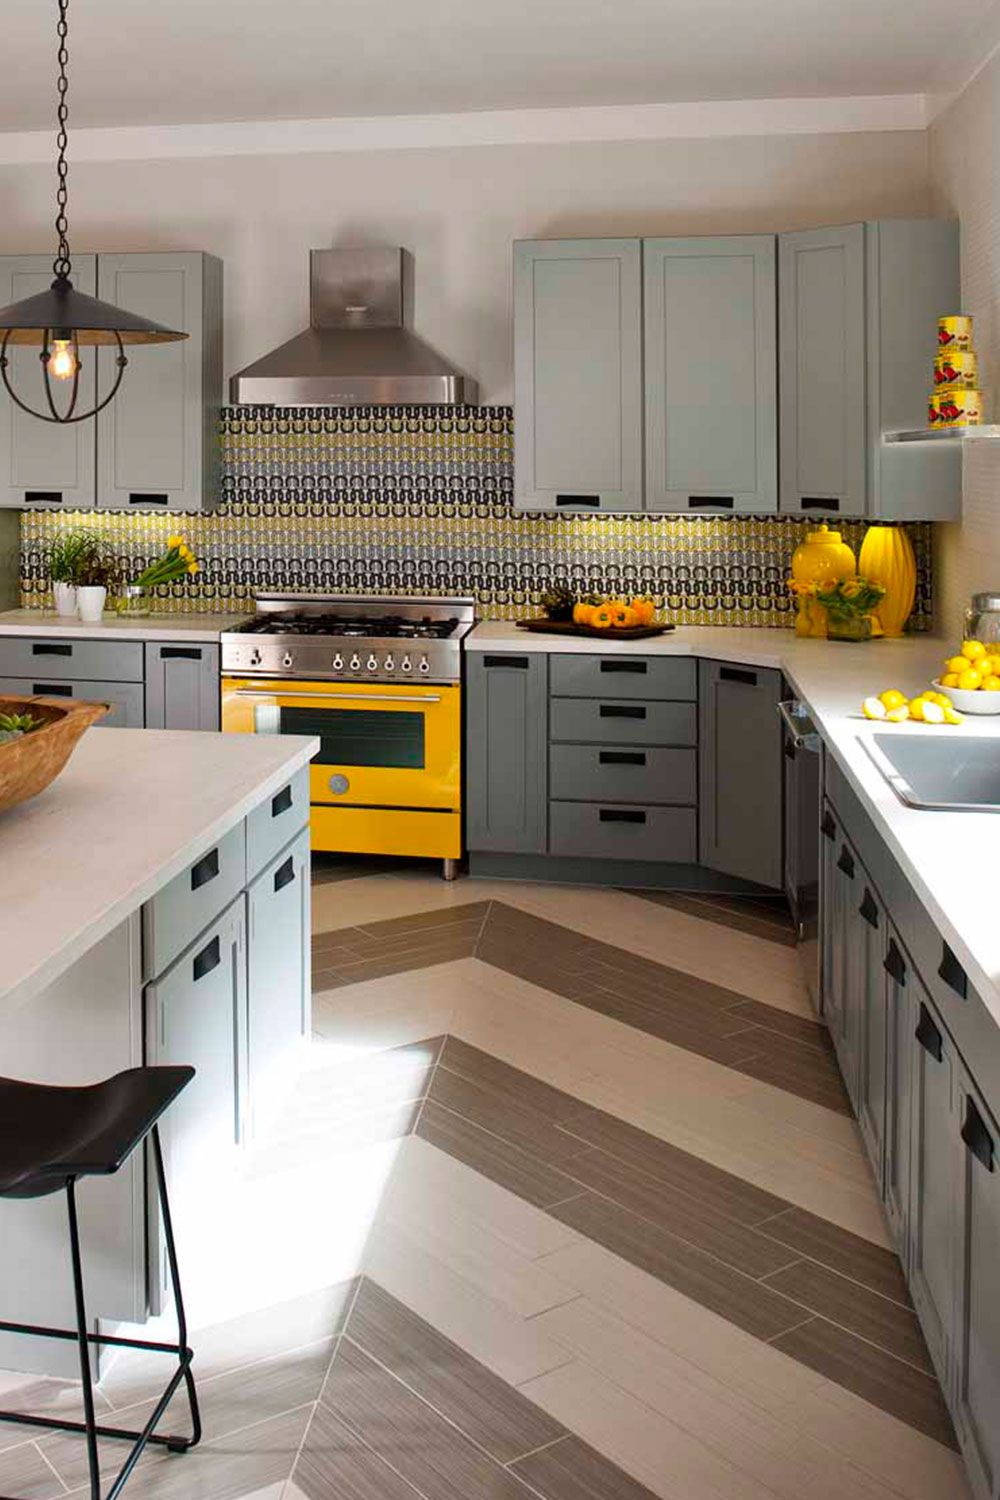 21 Yellow Kitchen Ideas - Decorating Tips for Yellow Colored Kitchens